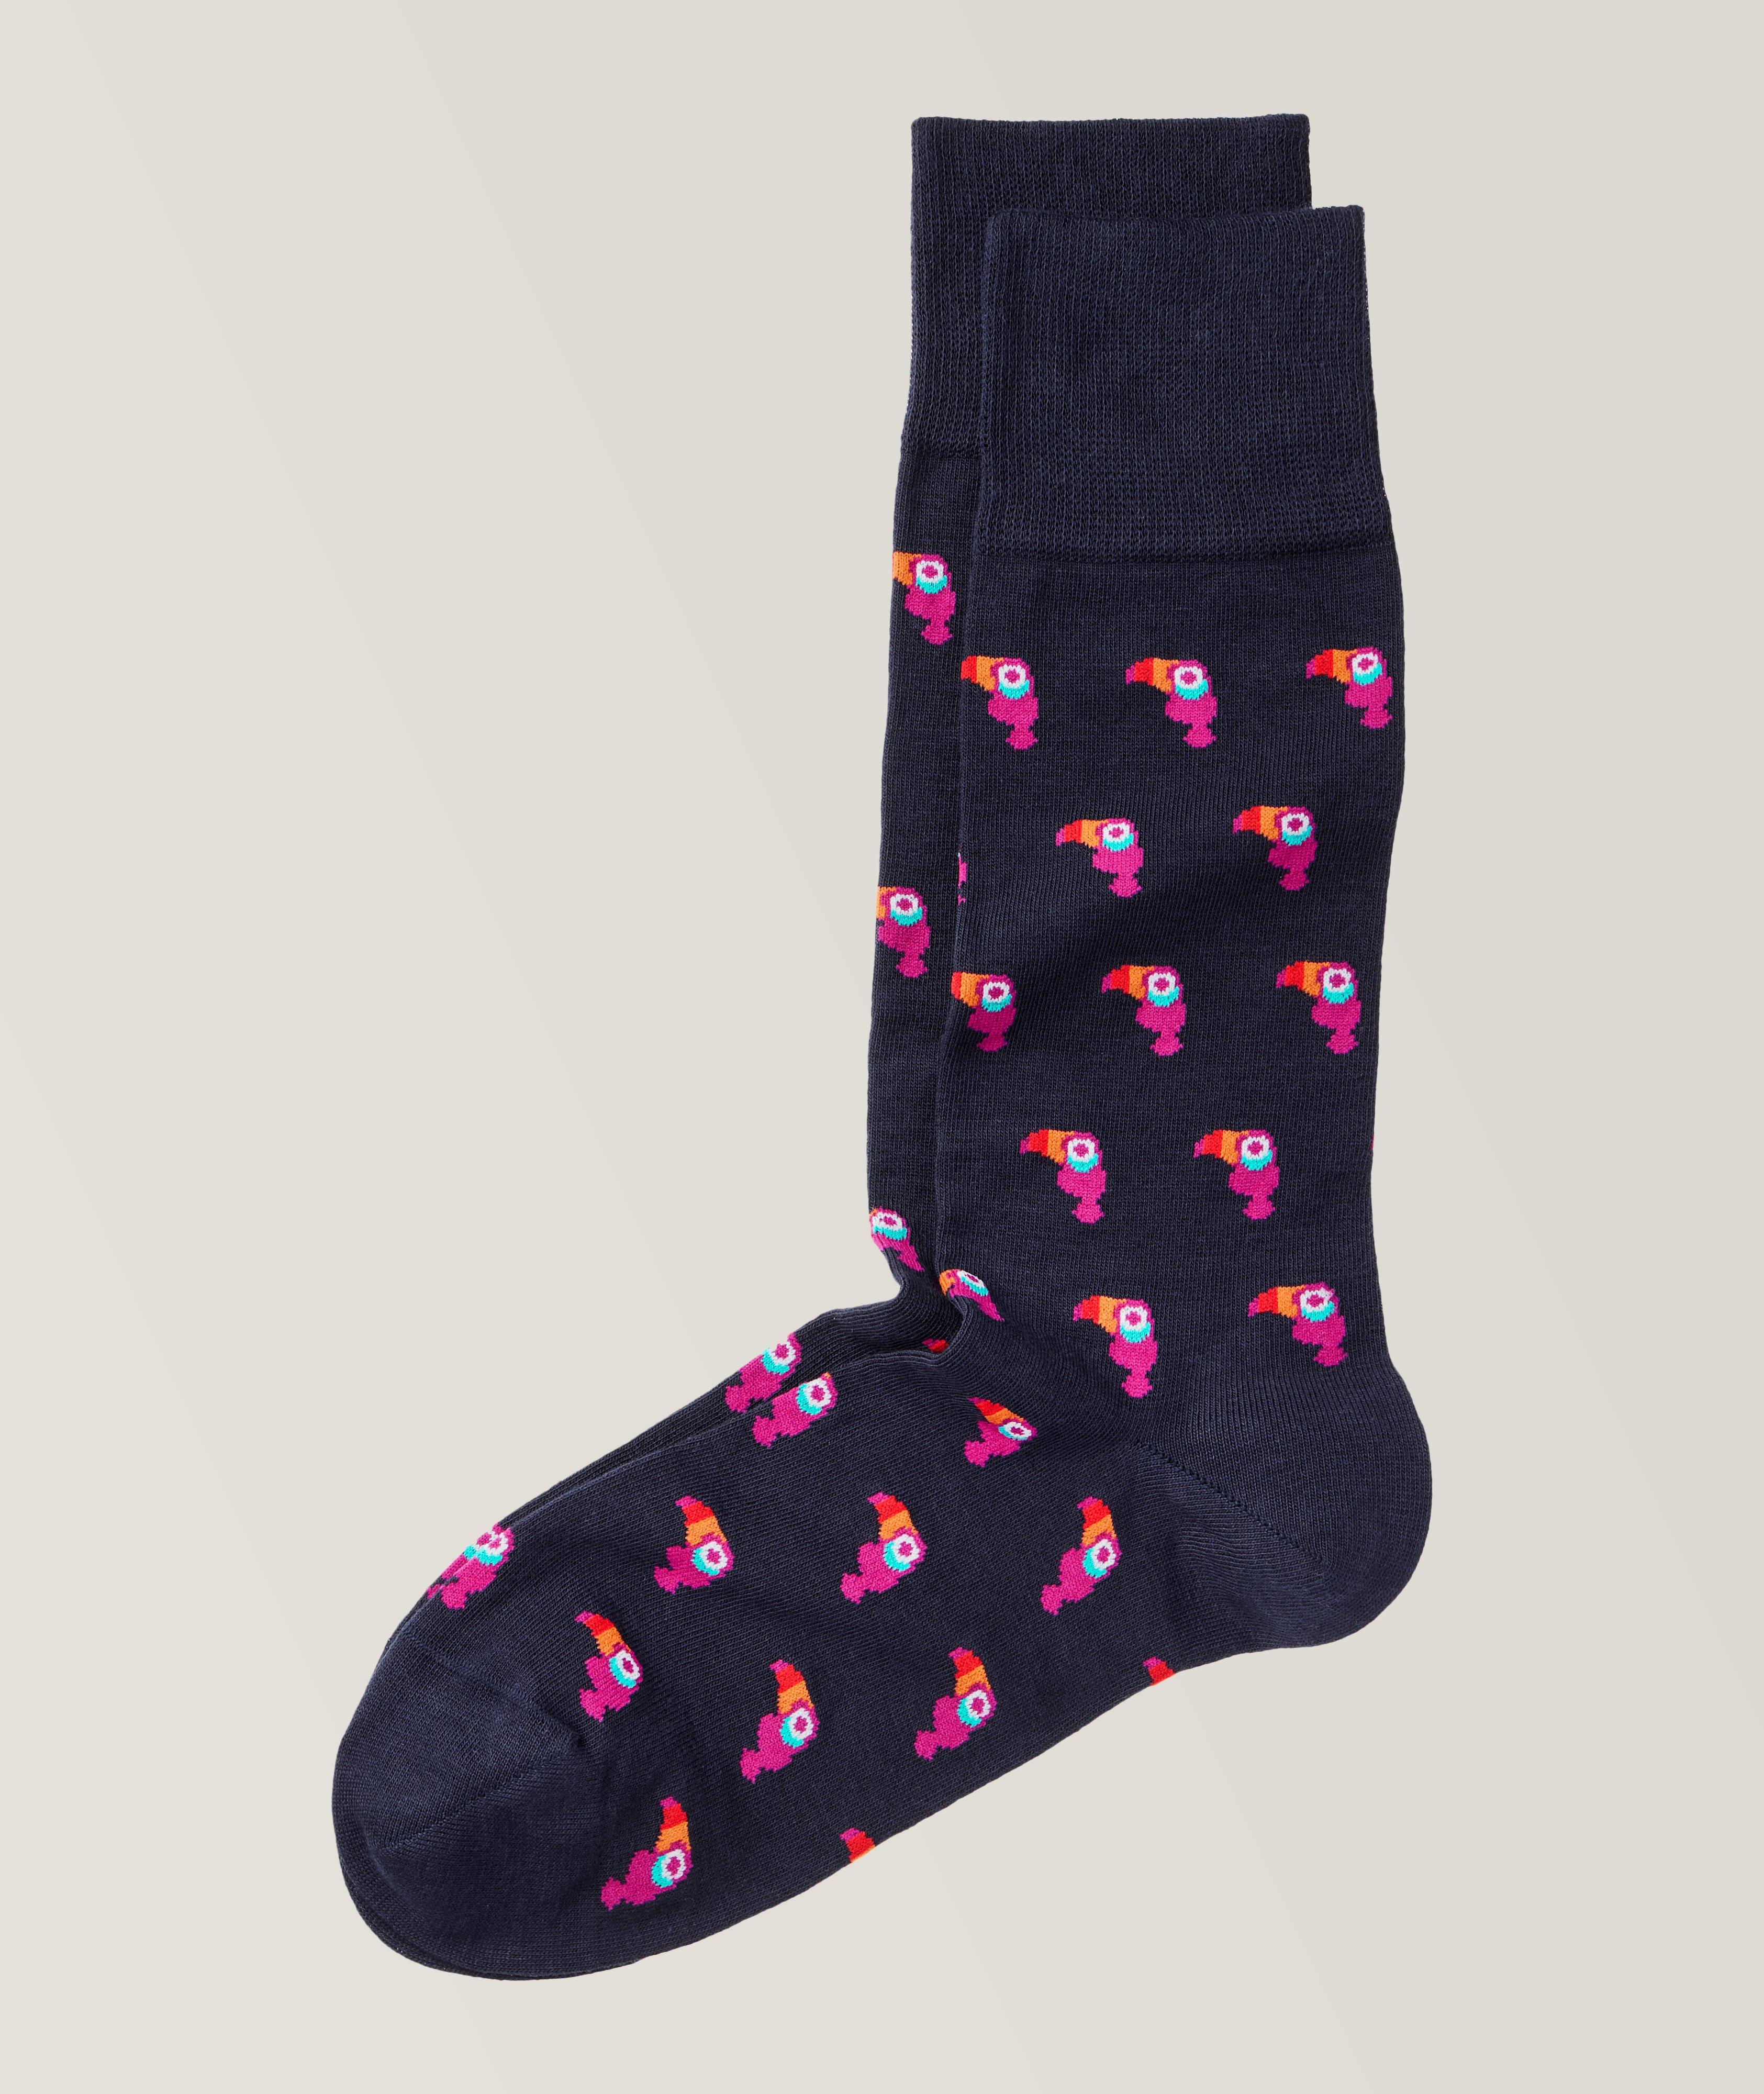 Toucan Patterned Cotton-Blend Mid Calf Socks